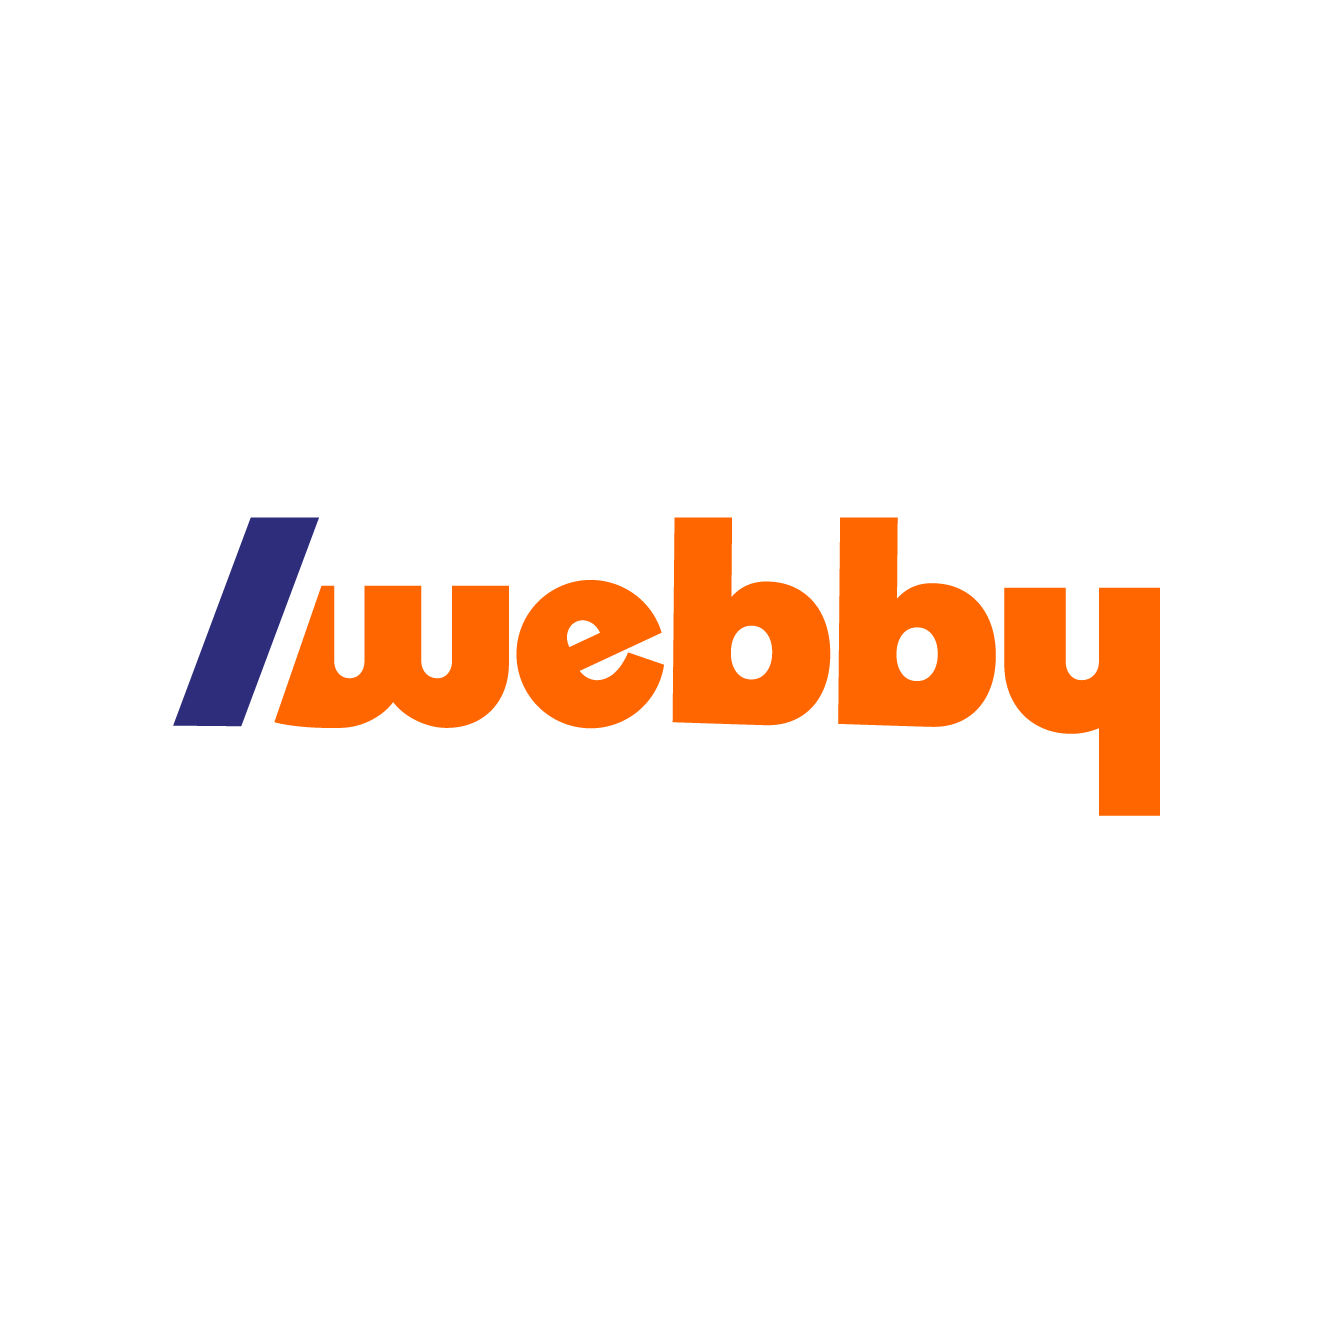 brand design by blade_feature logo_webby.png